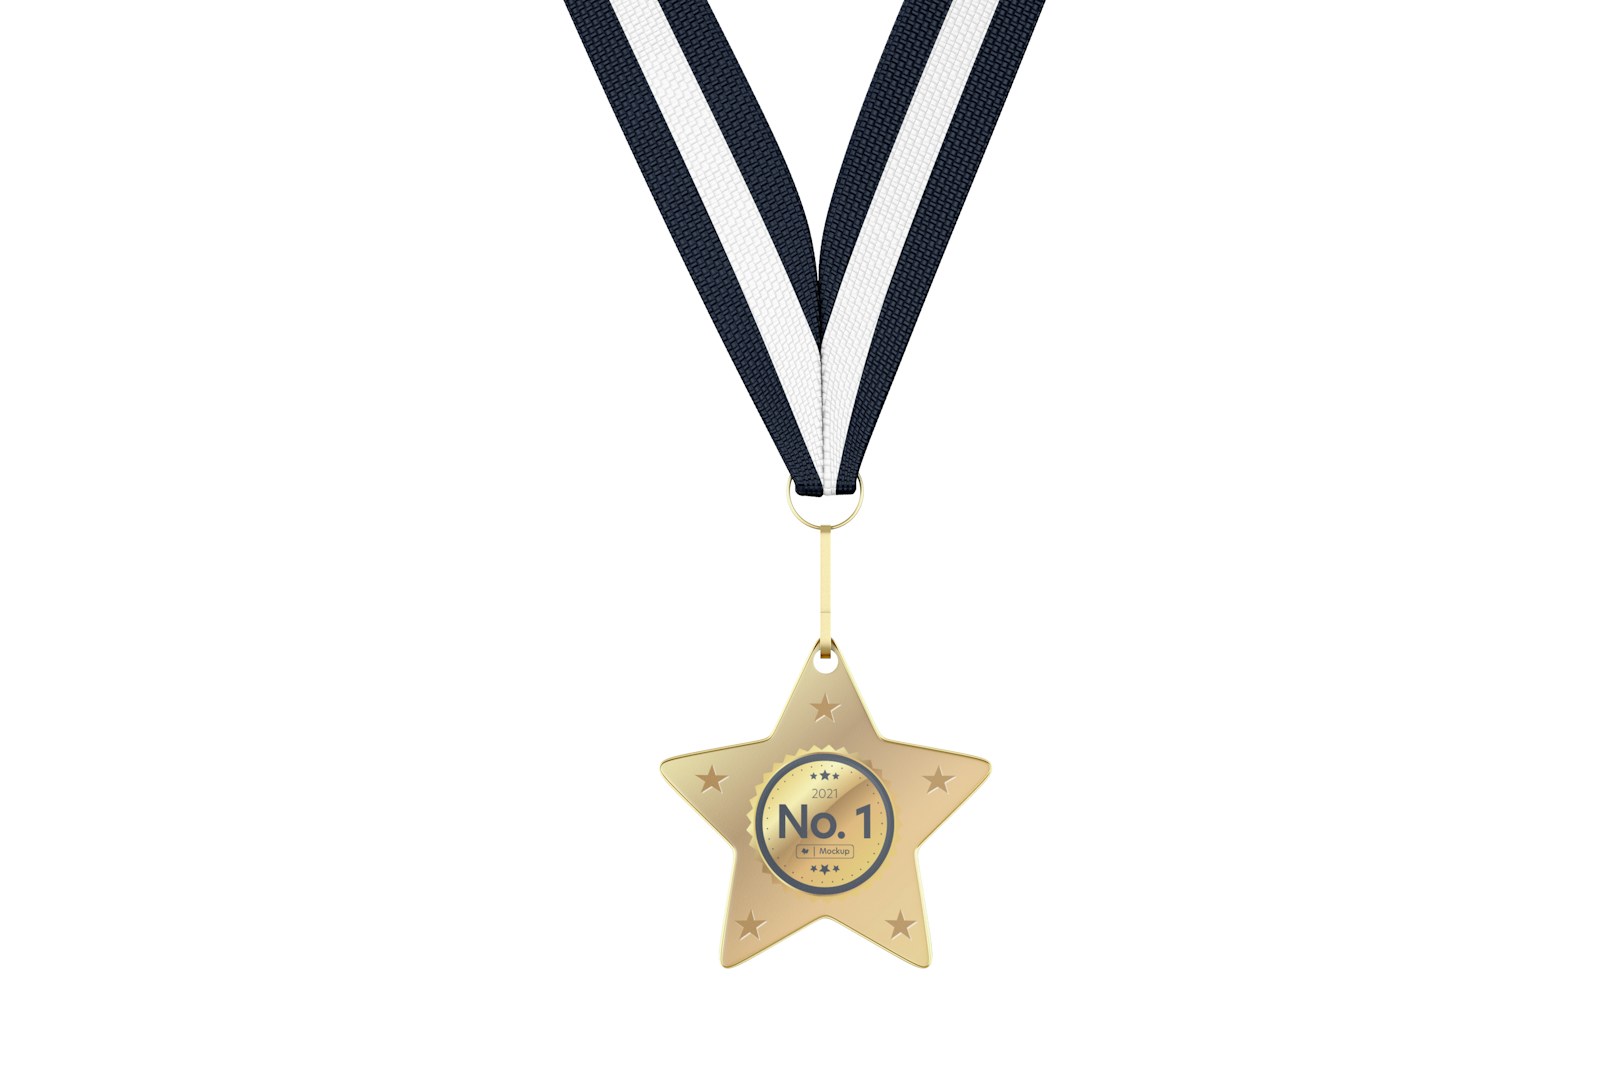 Star Competition Medal with Ribbon Mockup, Hanging